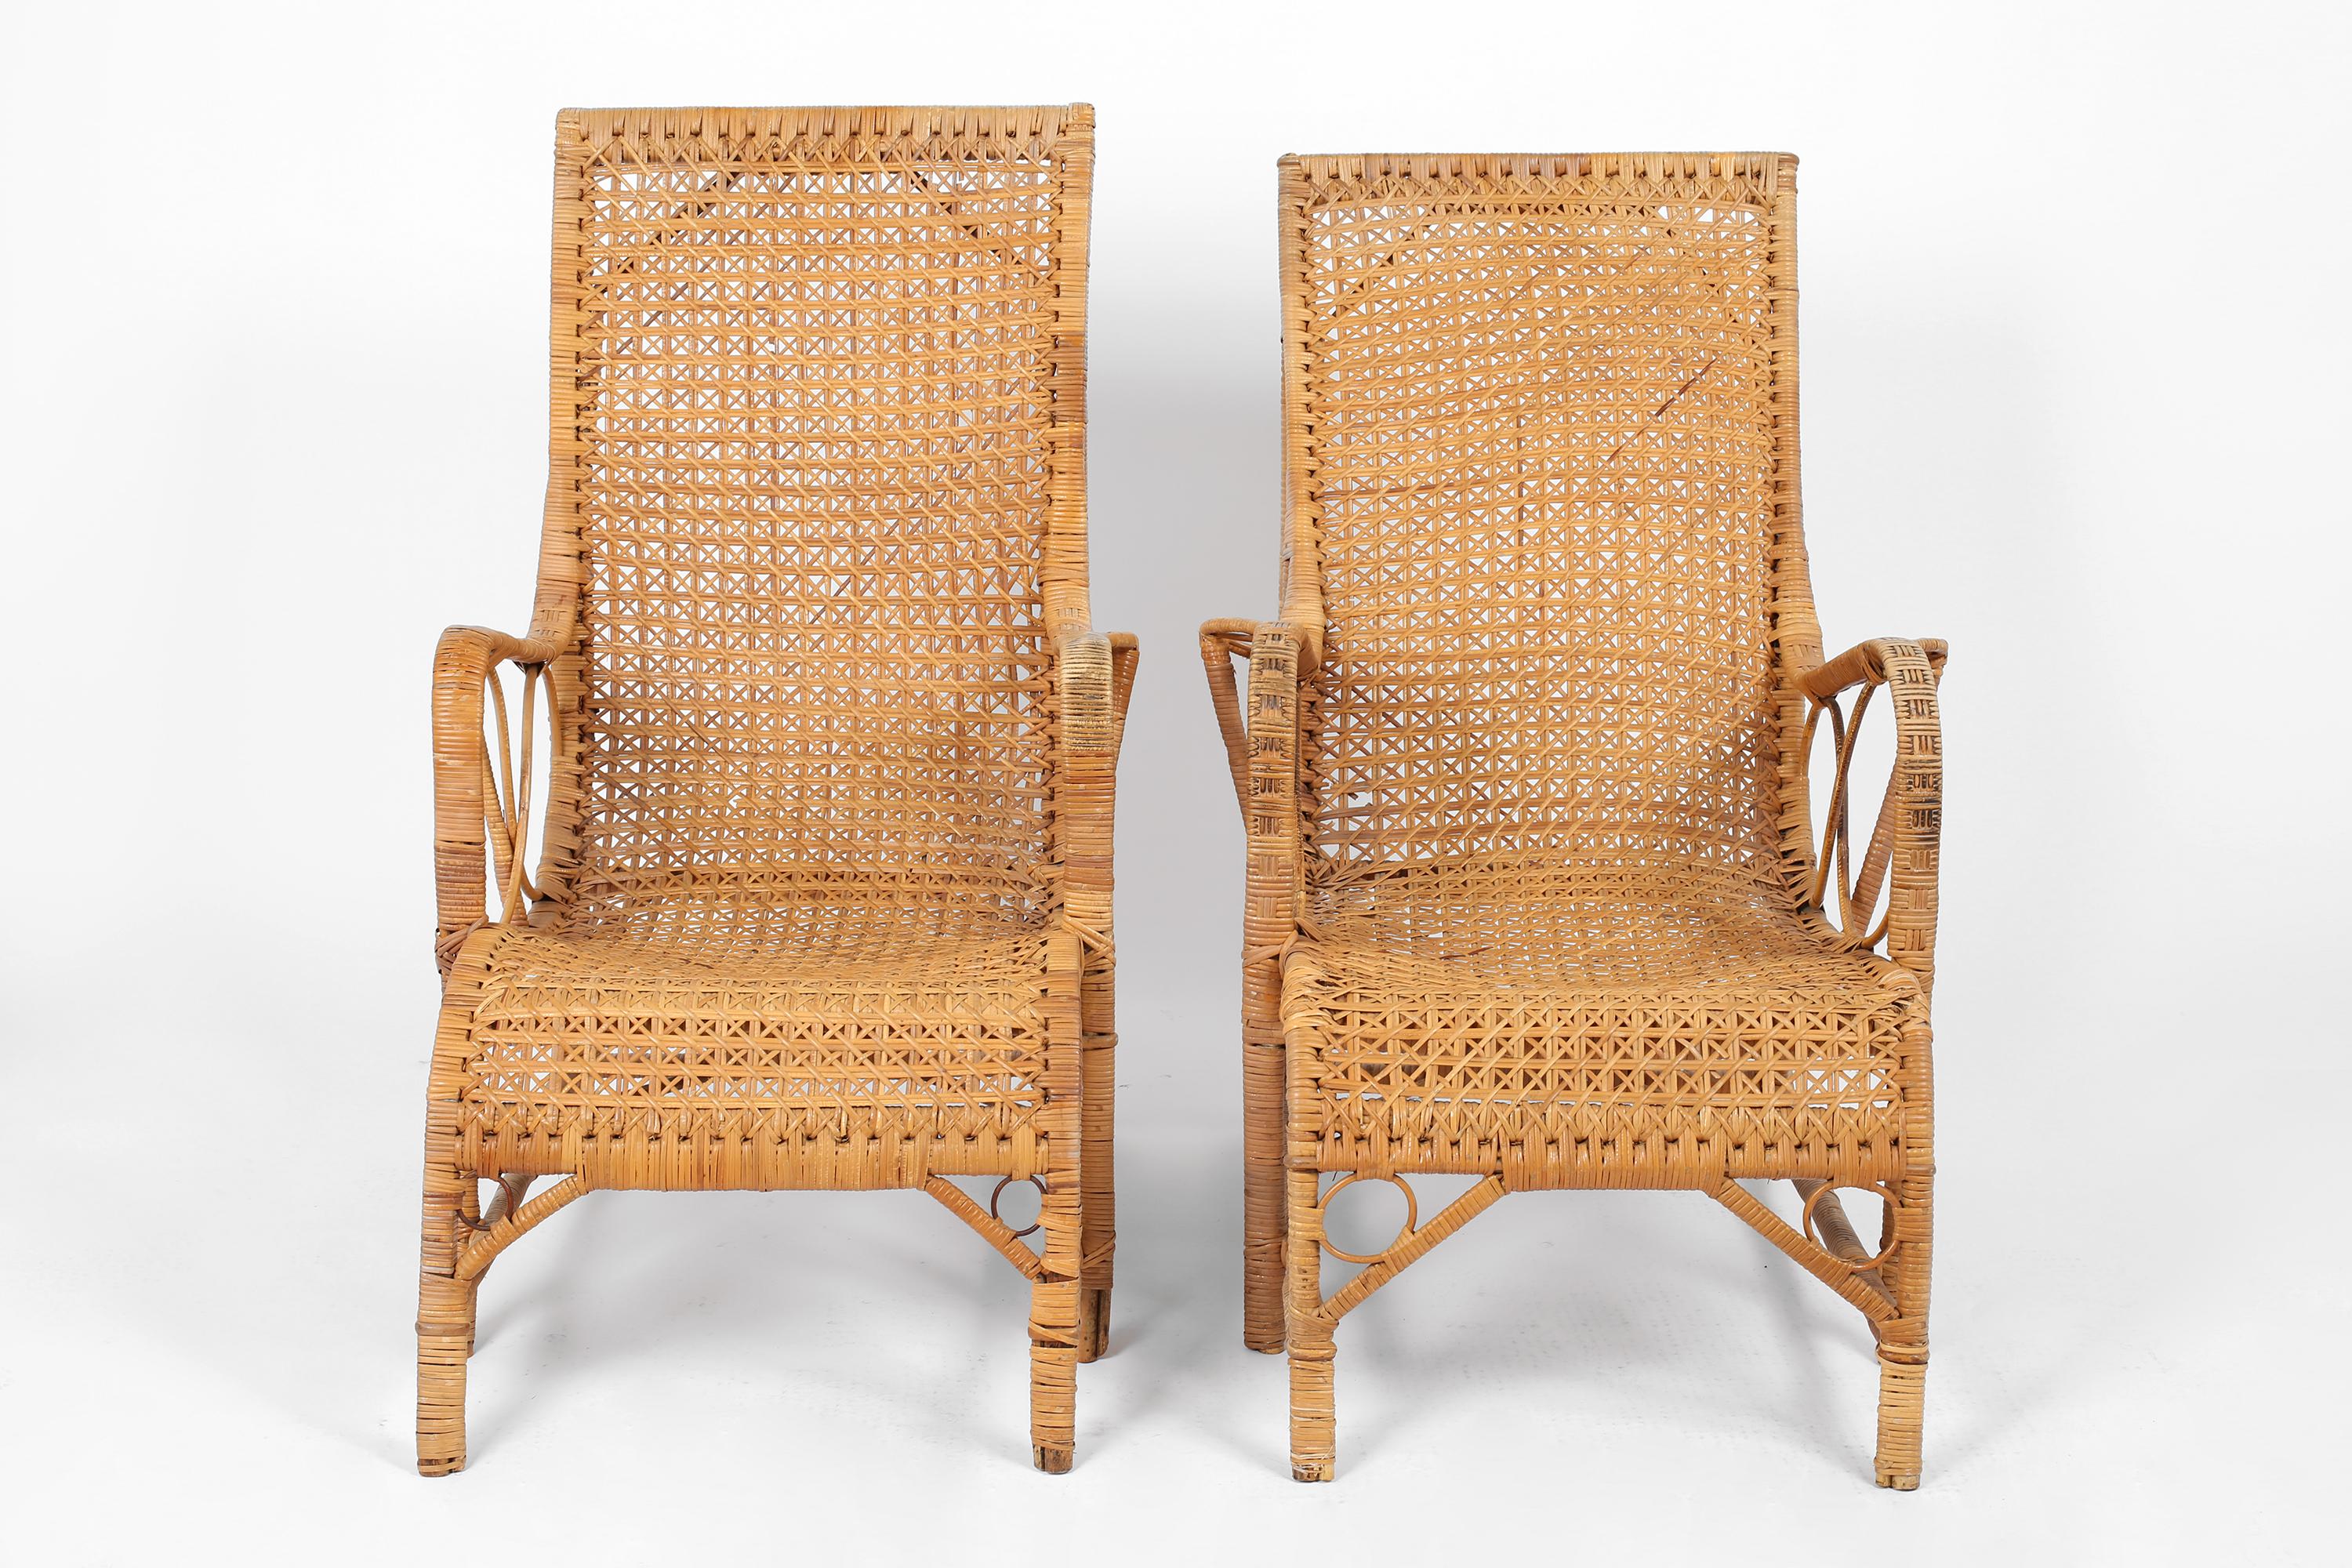 A near pair of large, elegant rattan loungers with cane binding and scrolling, intricately woven seats. French, c. 1940.